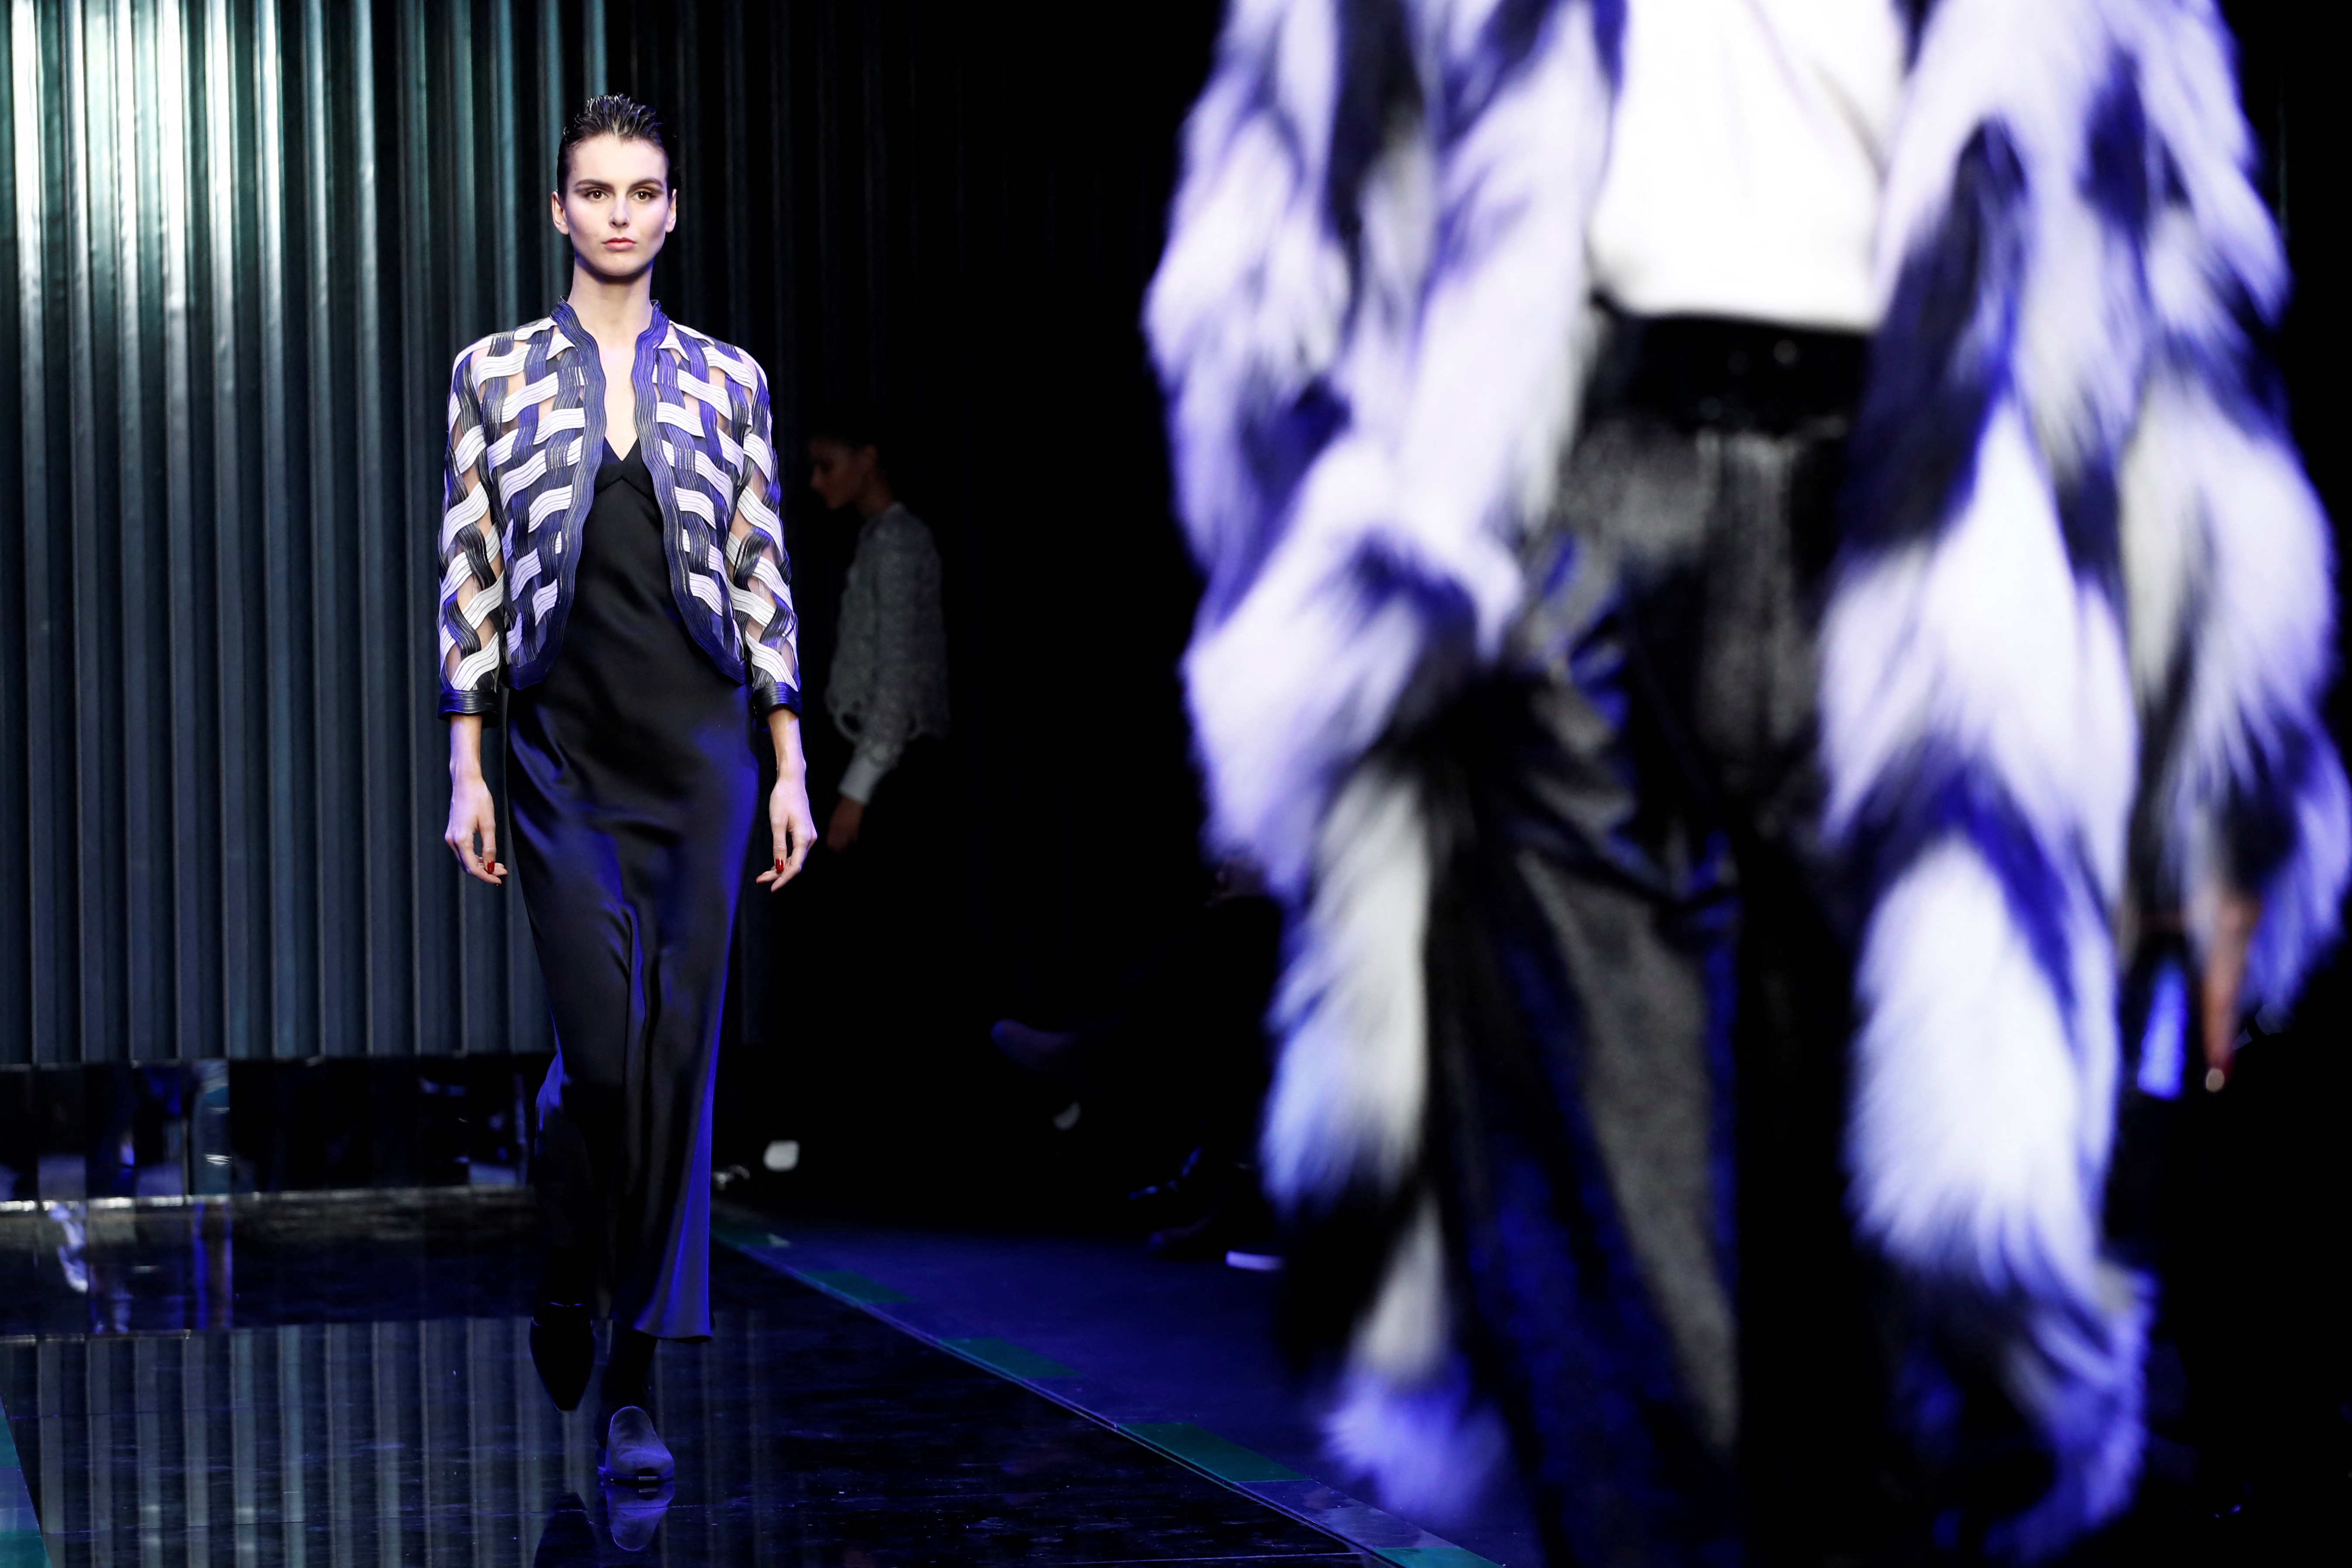 Armani pays tribute to Ukraine suffering with silent show | Reuters